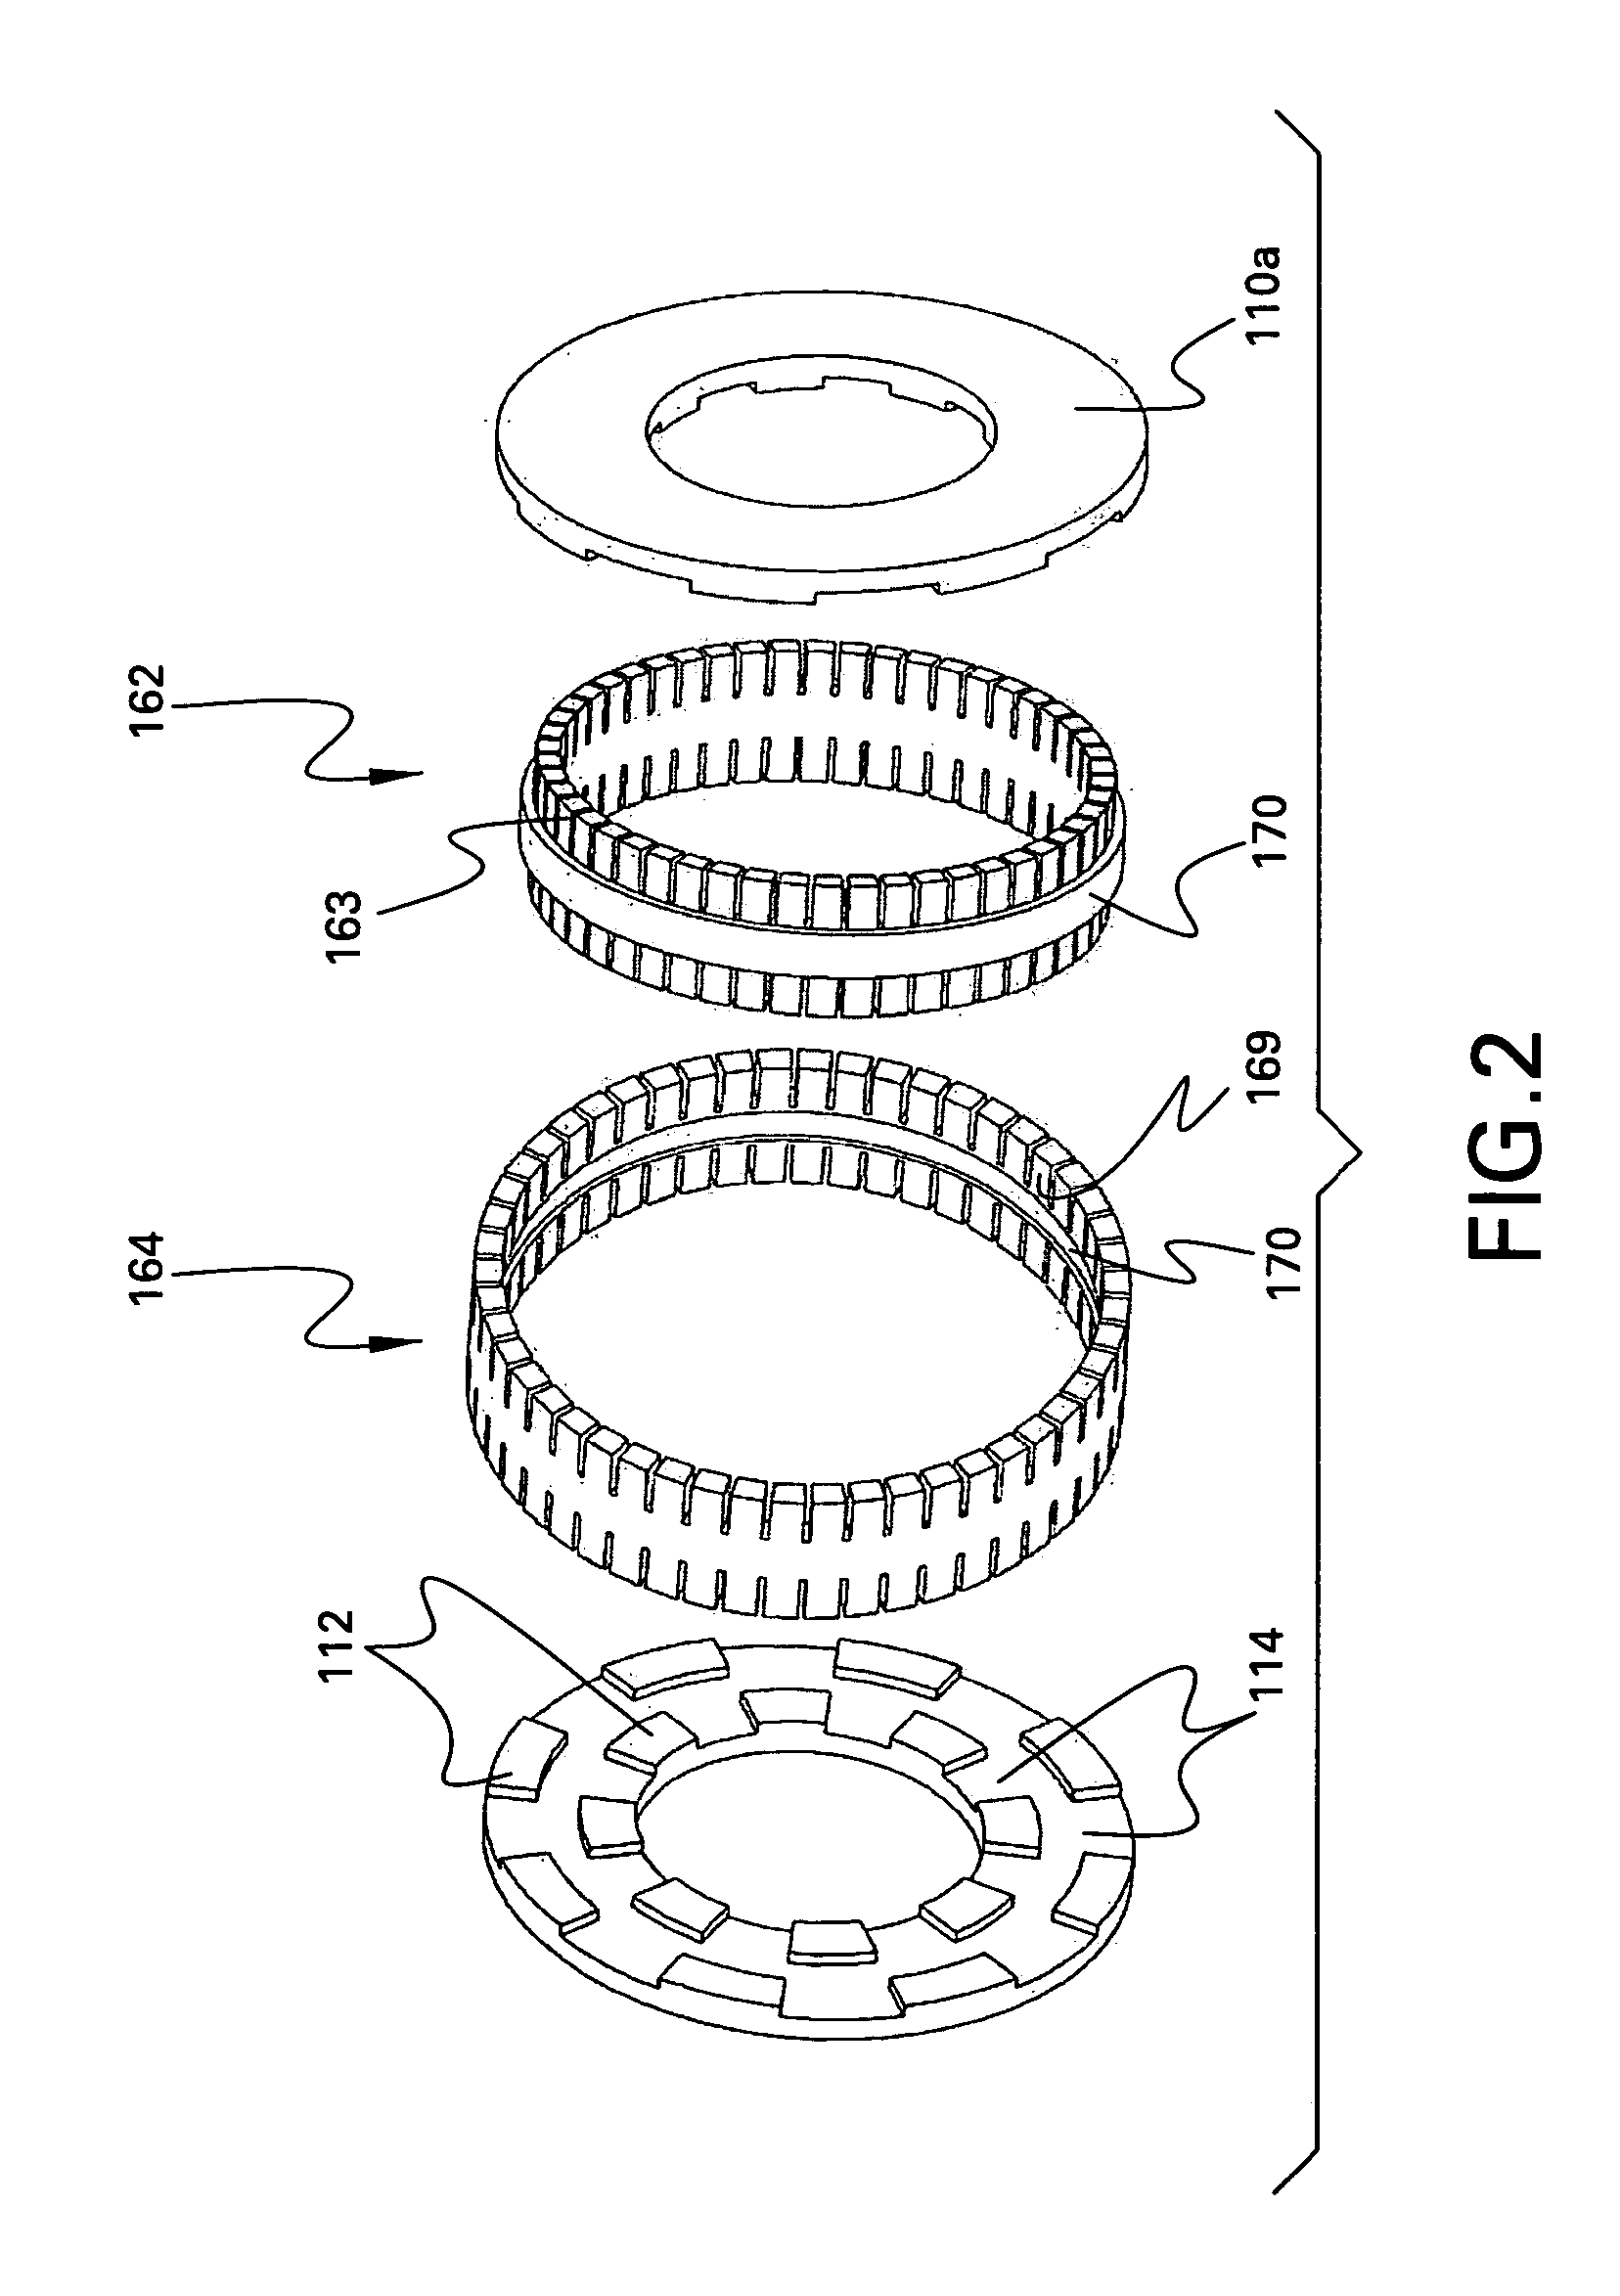 Superconducting rotating machines with stationary field coils